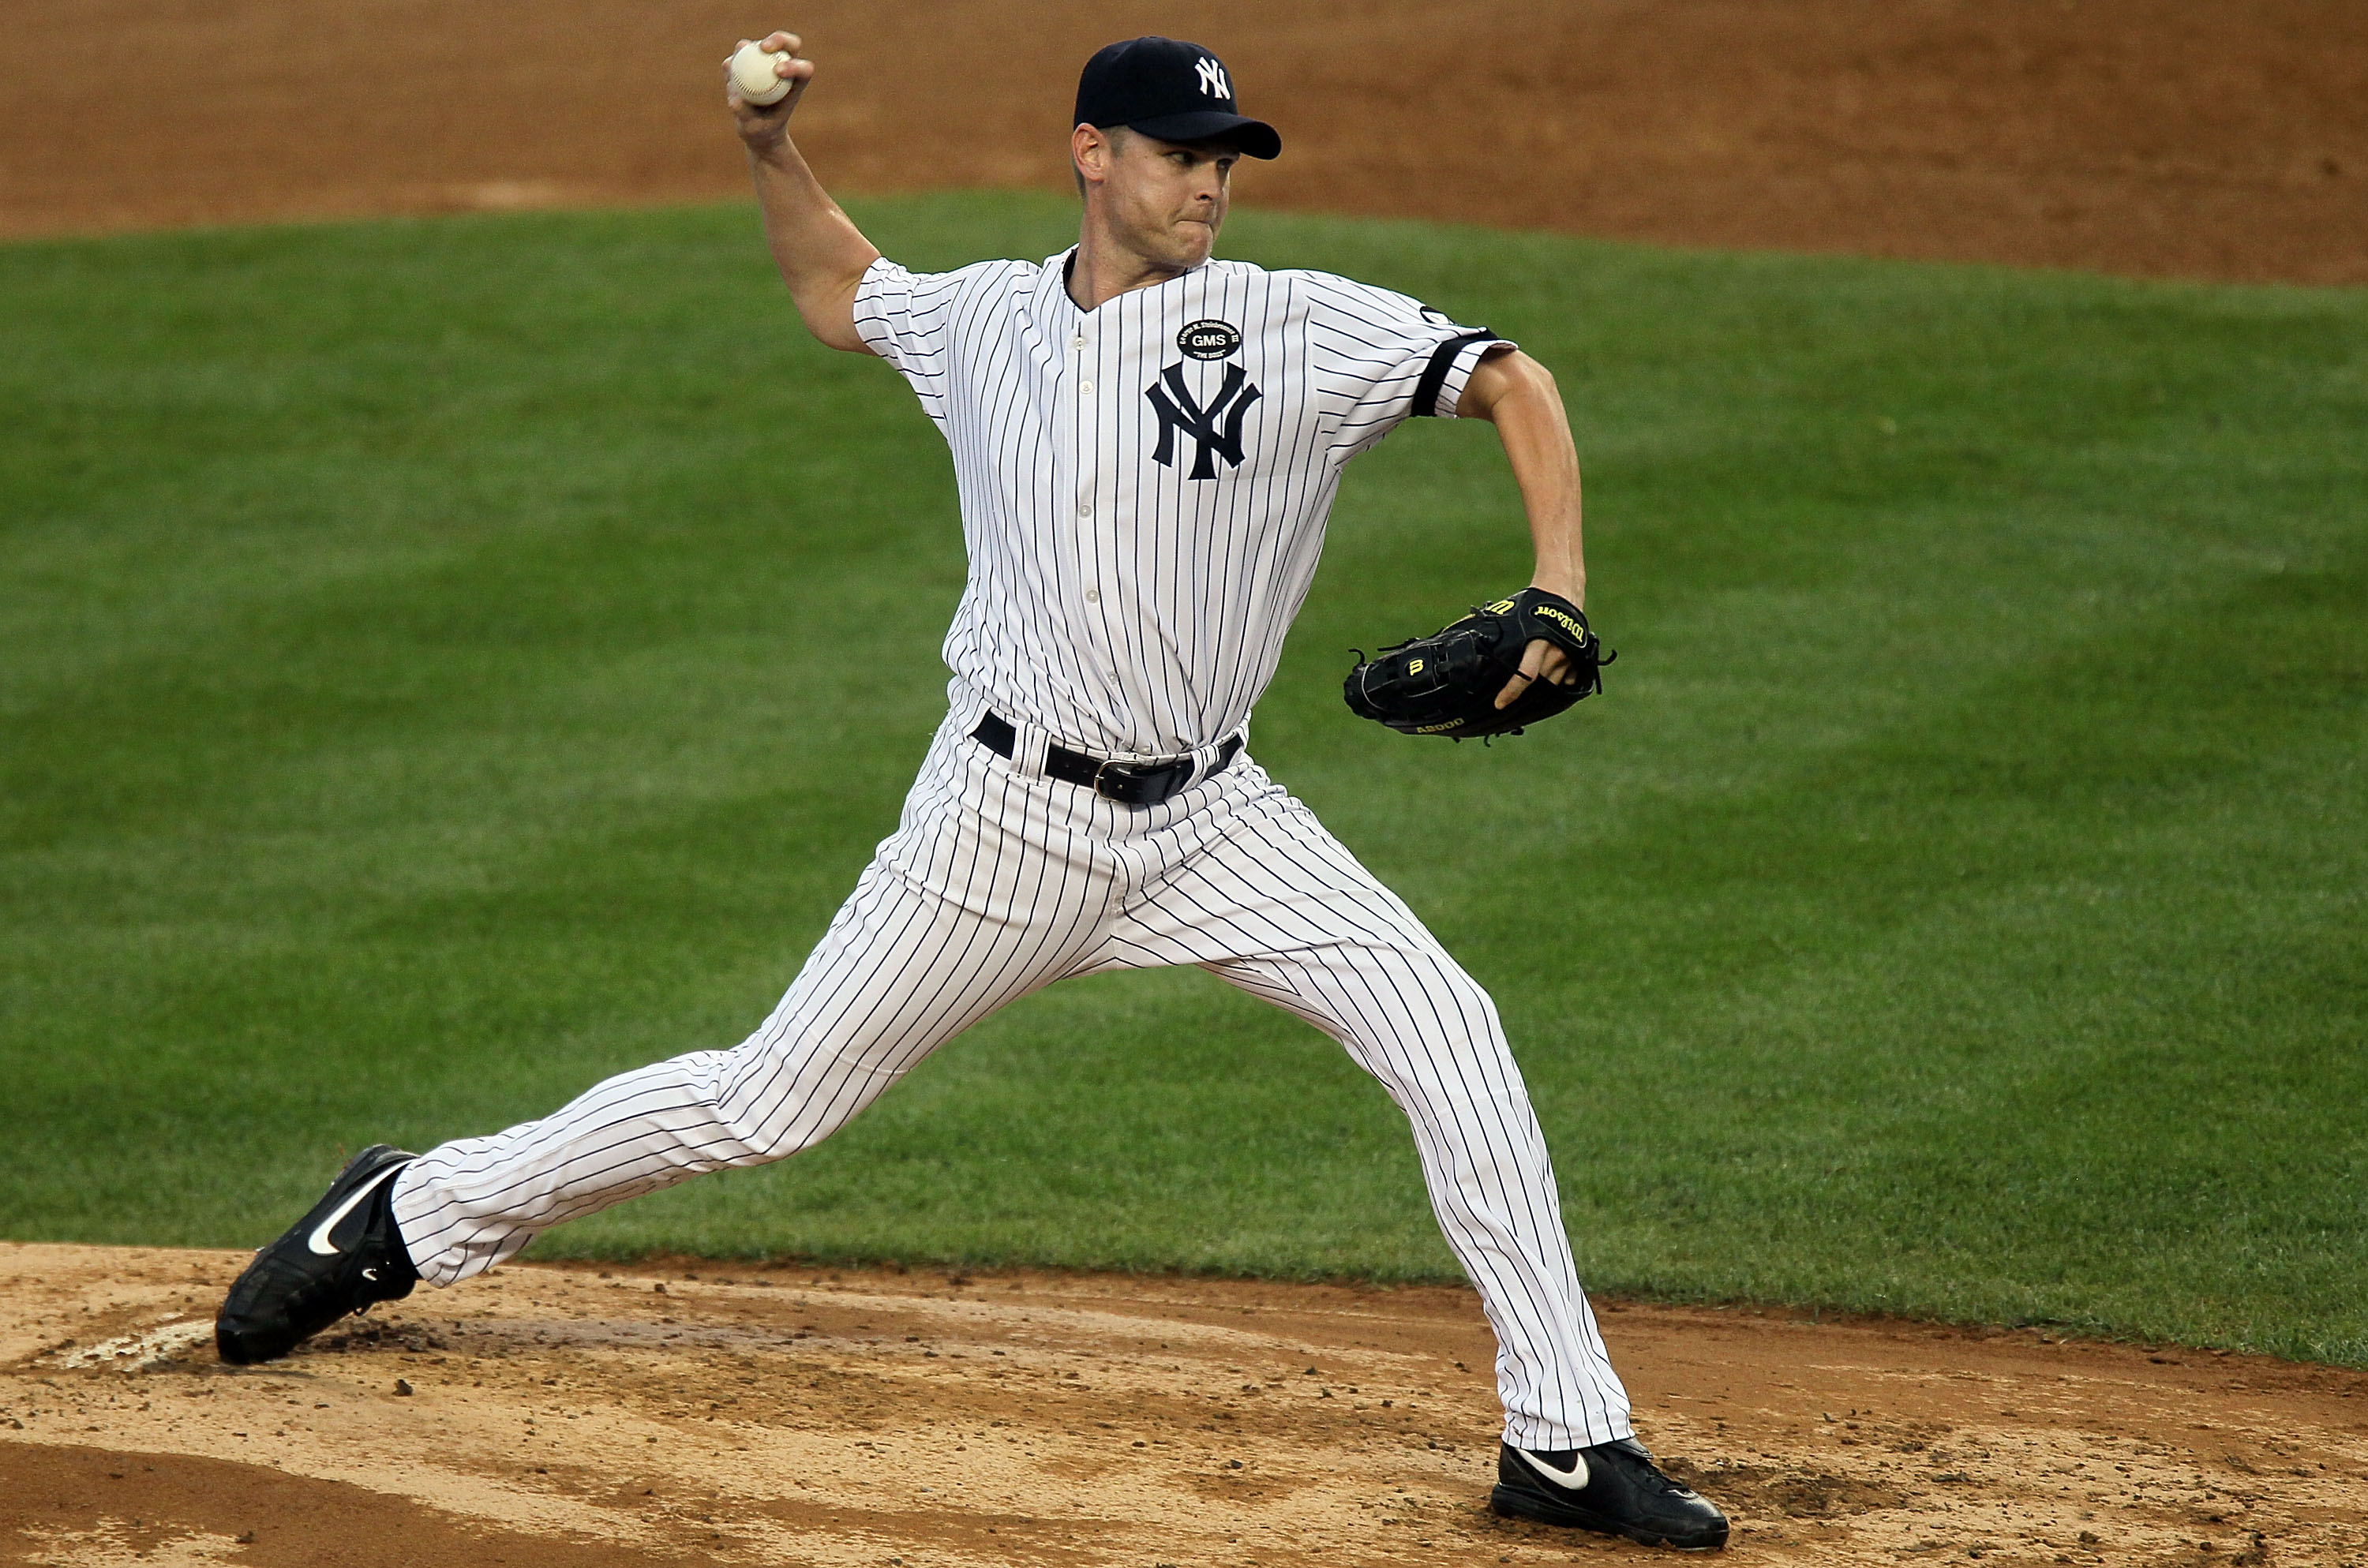 NEW YORK - AUGUST 22:  Kerry Wood #39 of the New York Yankees pitches against the Seattle Mariners on August 22, 2010 at Yankee Stadium in the Bronx borough of New York City.The Yankees defeated the Mariners 10-0.  (Photo by Jim McIsaac/Getty Images)